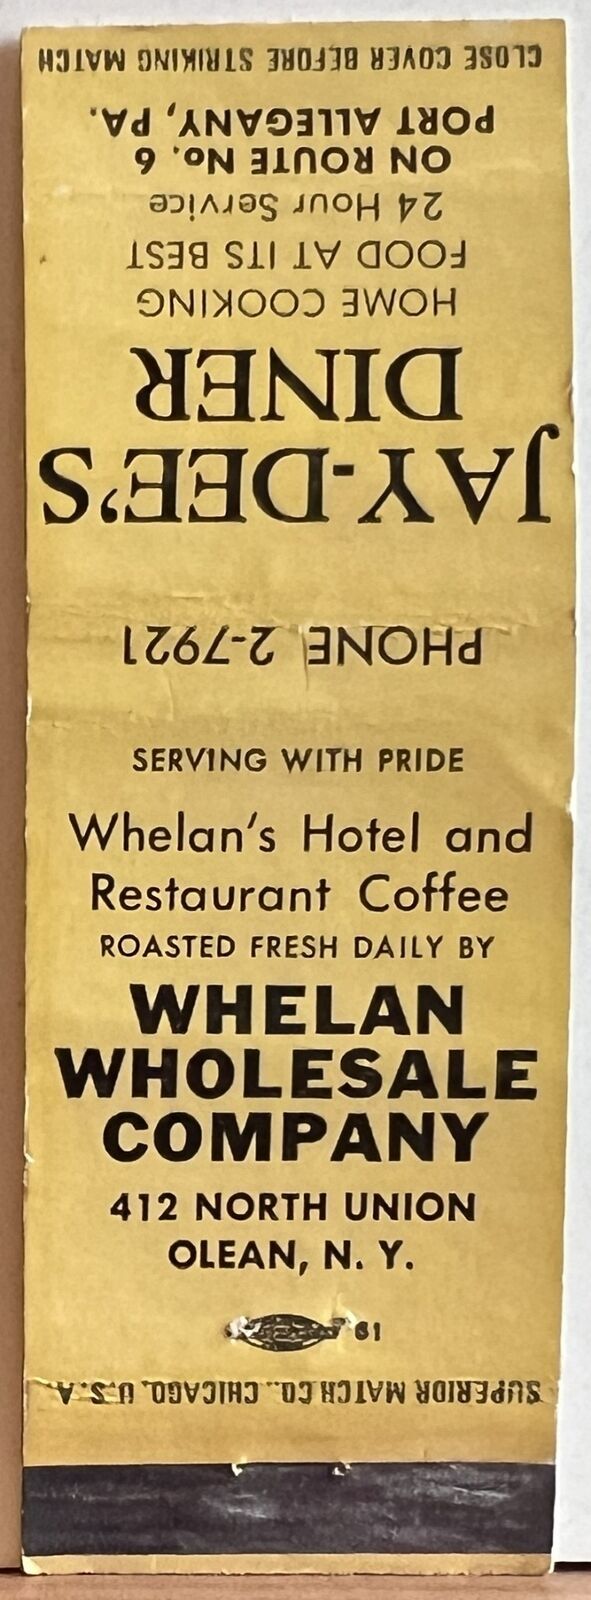 Whelan Wholesale Company Olean NY New York Vintage Matchbook Cover